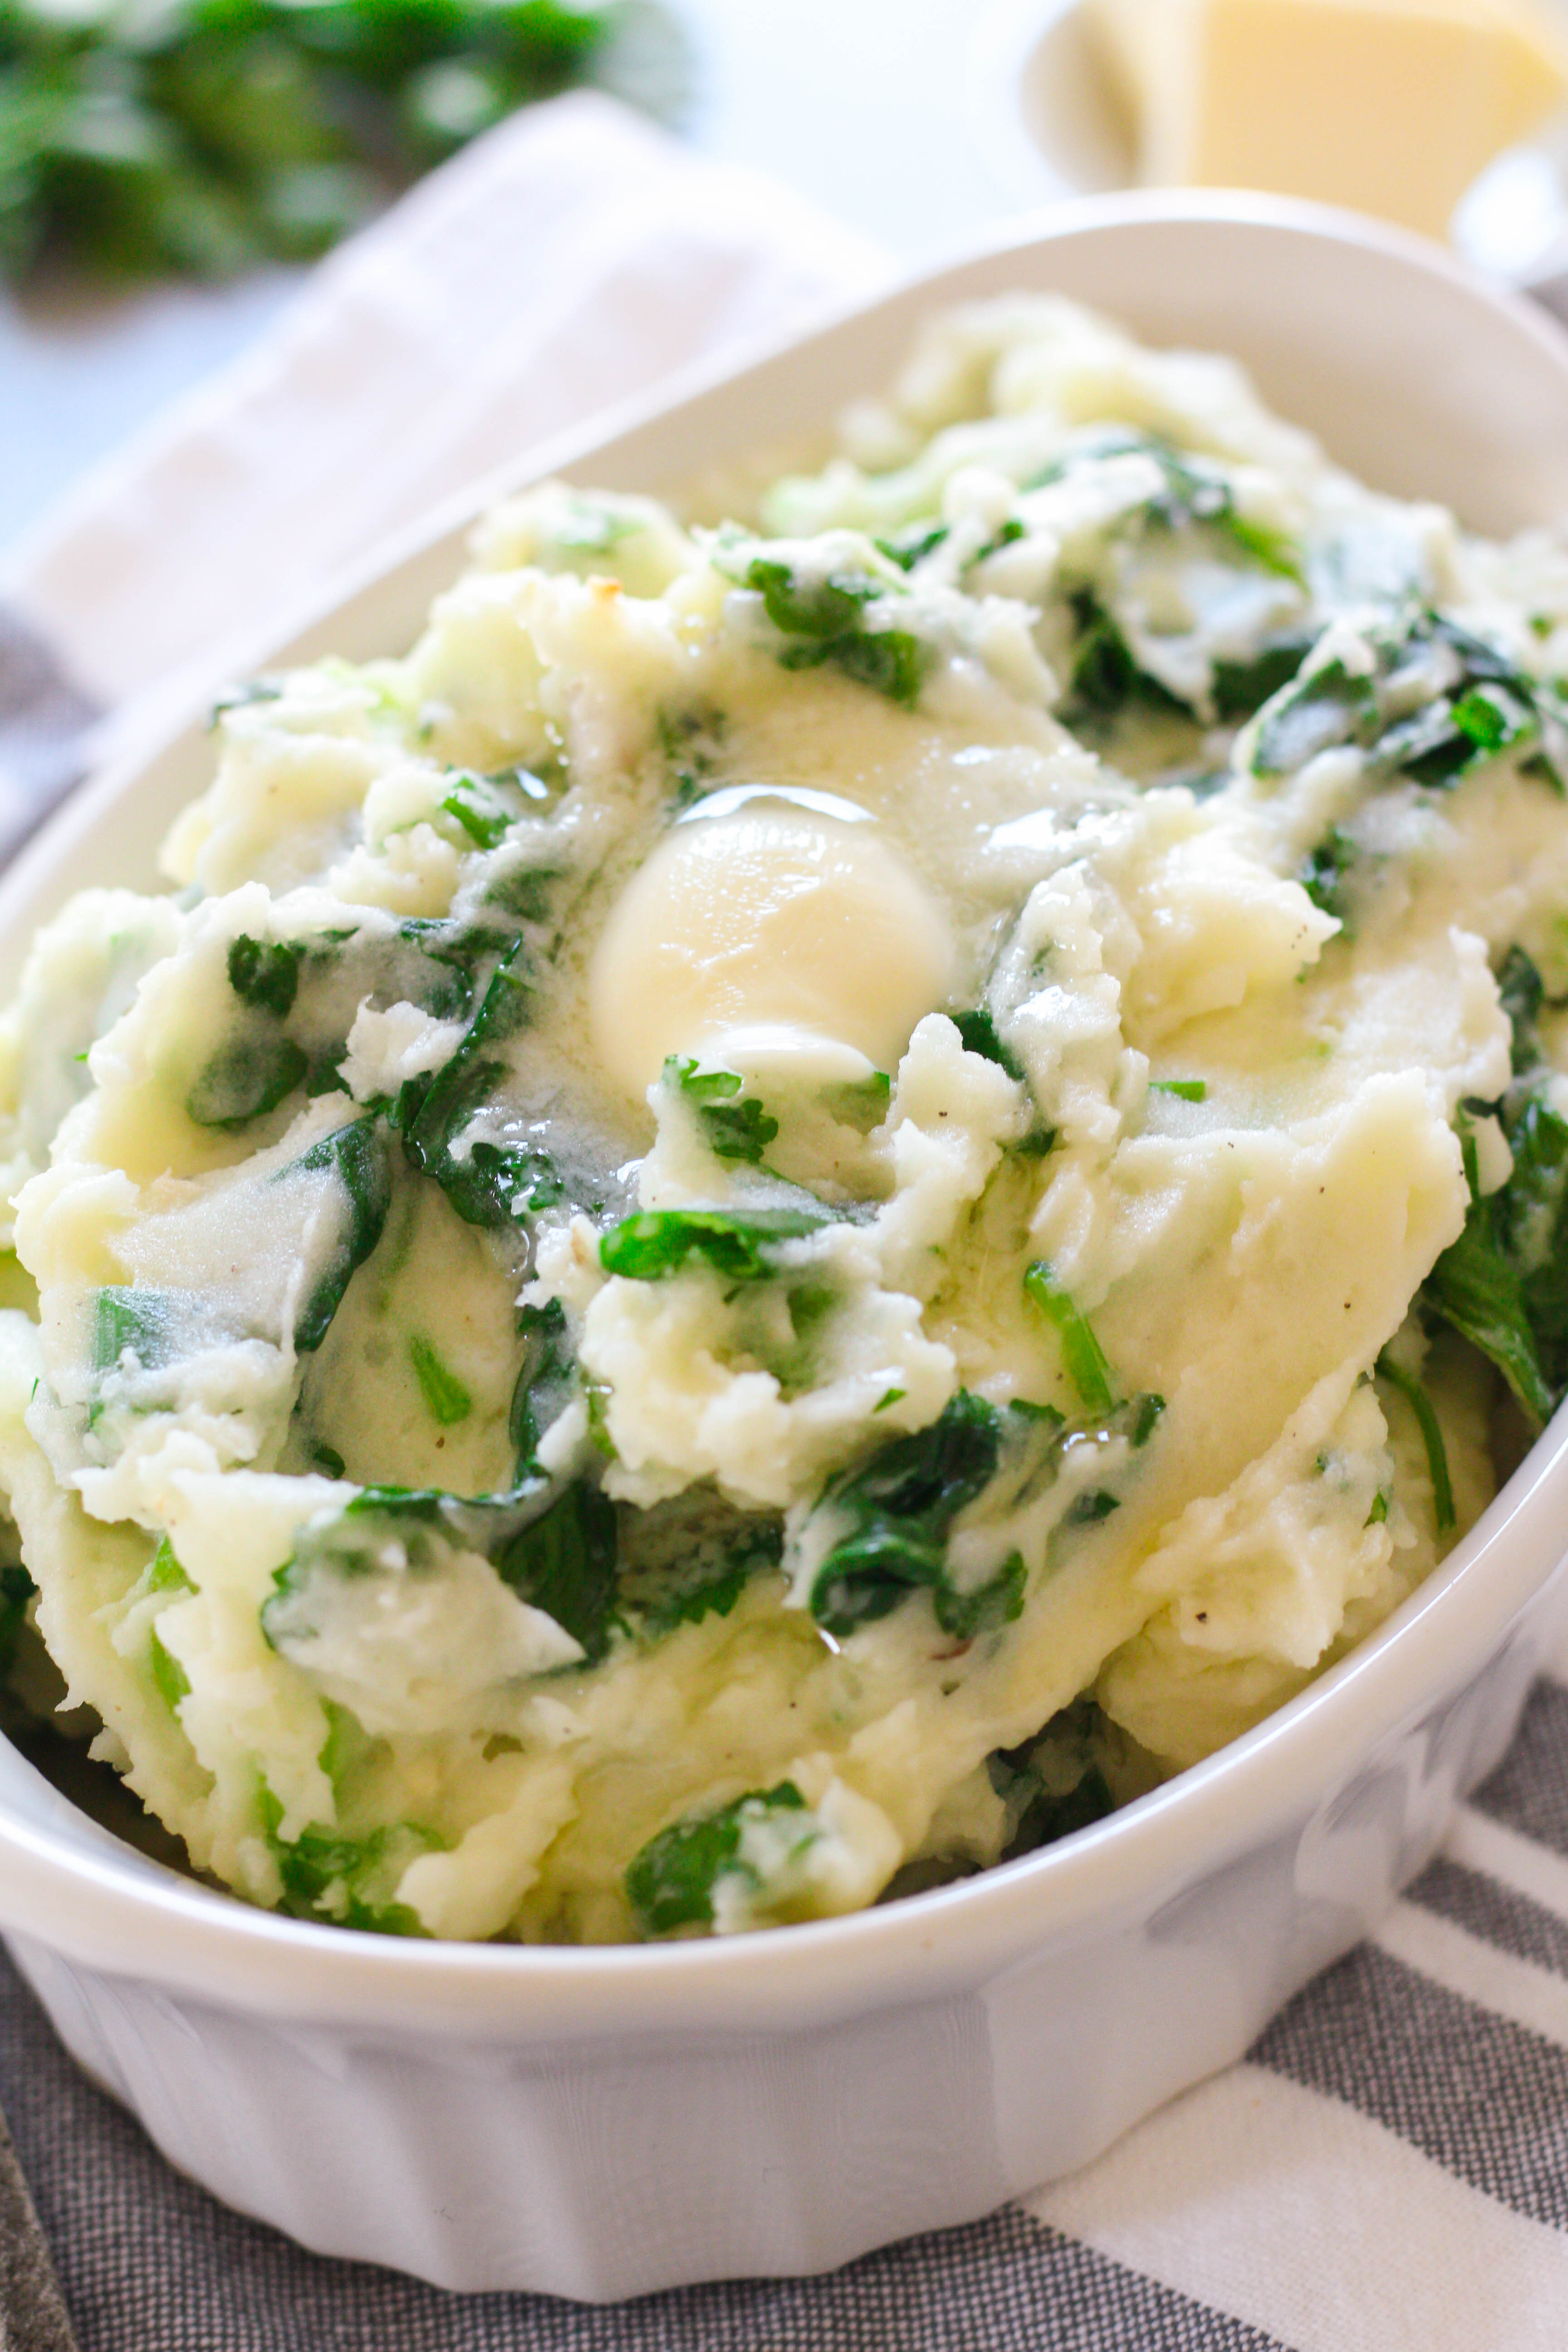 Creamy and buttery whipped potatoes with sauteed tender baby kale, green onions and parsley make up this delicious authentic Irish colcannon. This traditional Irish dish is perfect to serve alongside roasted chicken or a seared steak. 